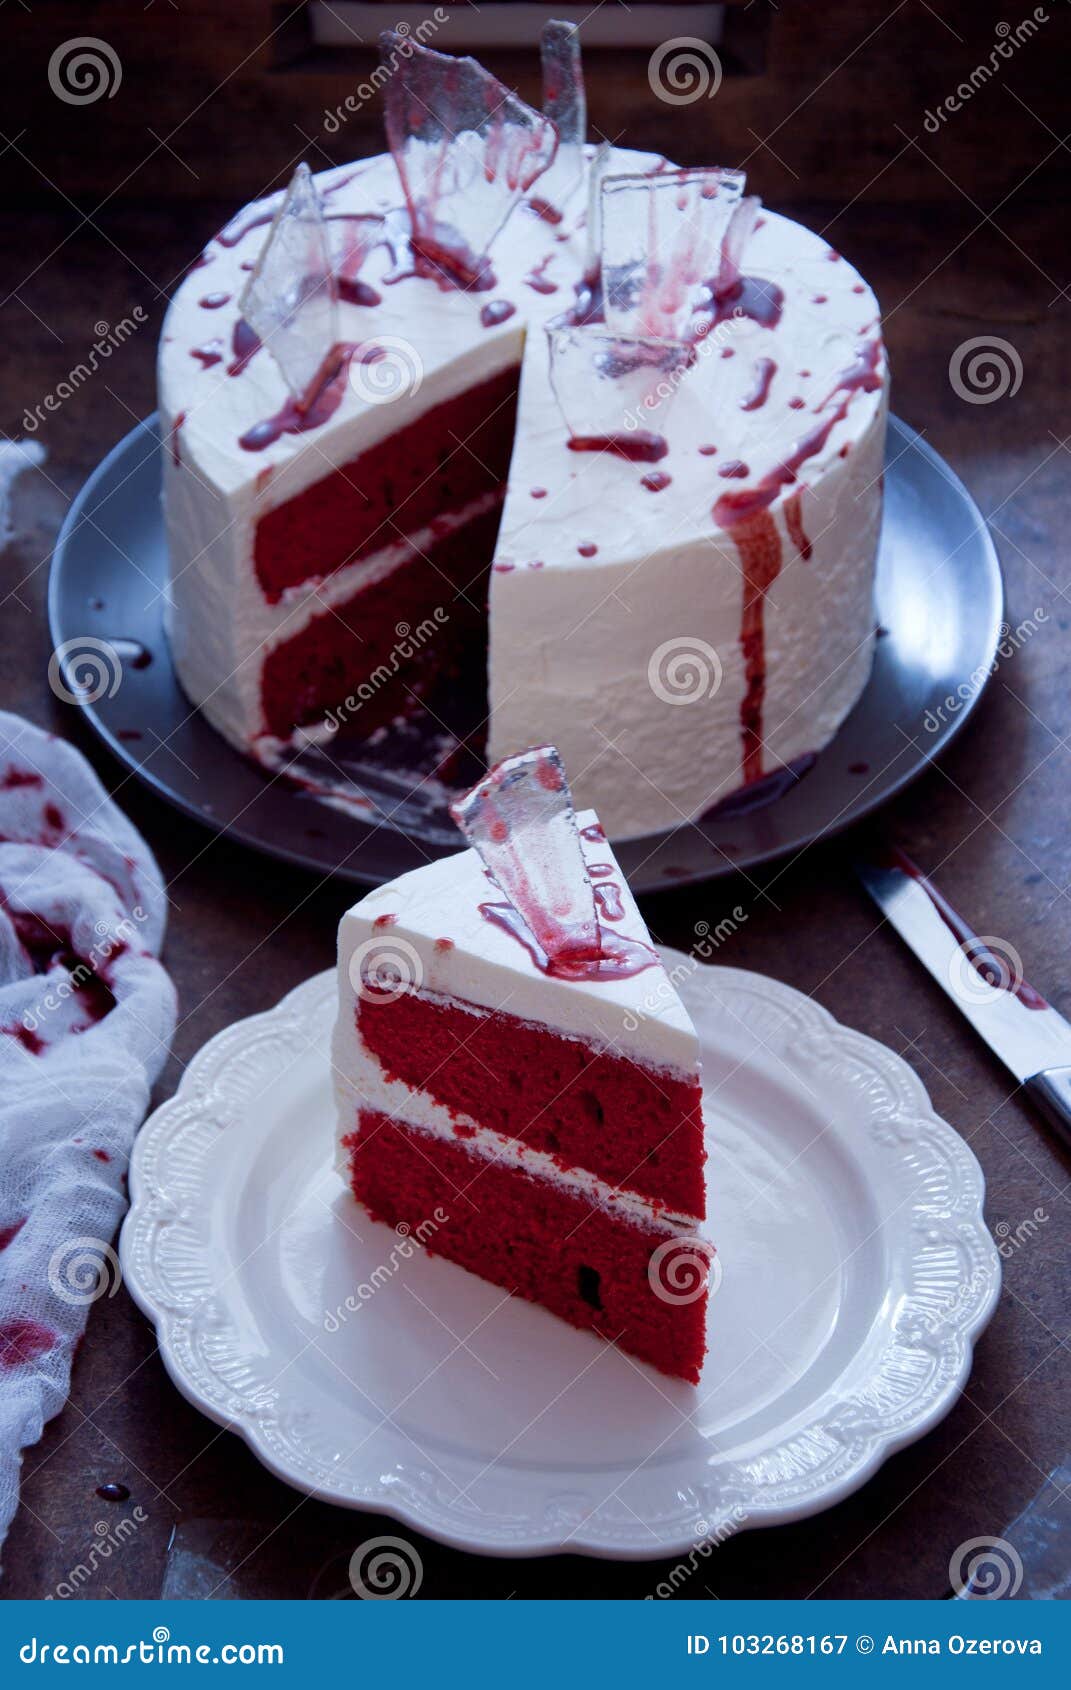 Red Velvet Cake Decorated for Halloween Stock Image - Image of domestic ...